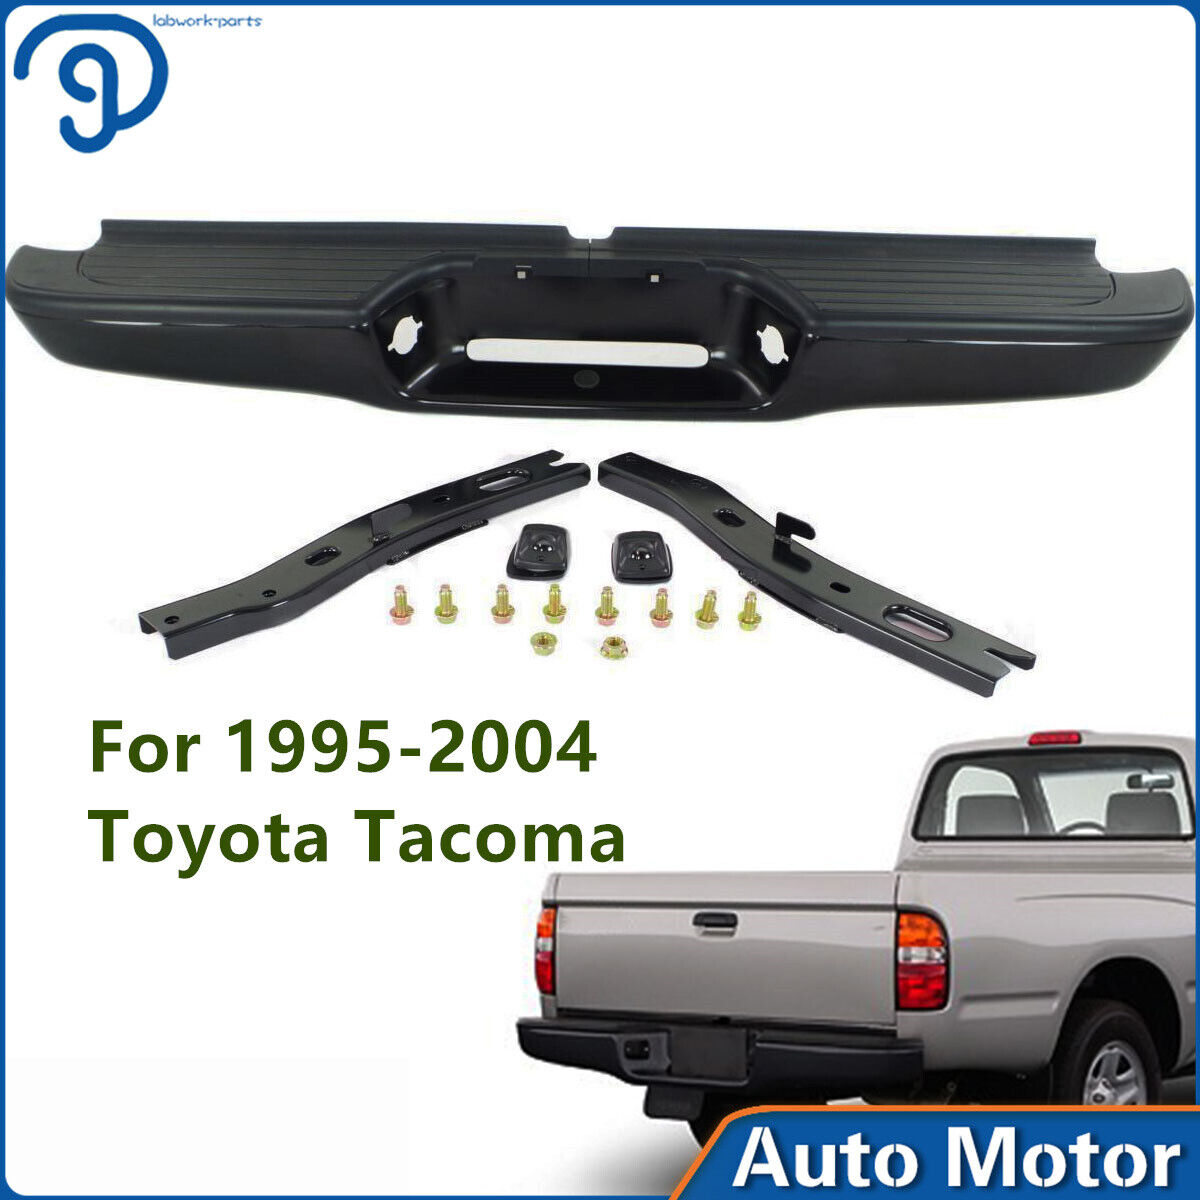 Black Complete Rear Step Bumper Assembly For 1995-2003 2004 Toyota Tacoma Truck